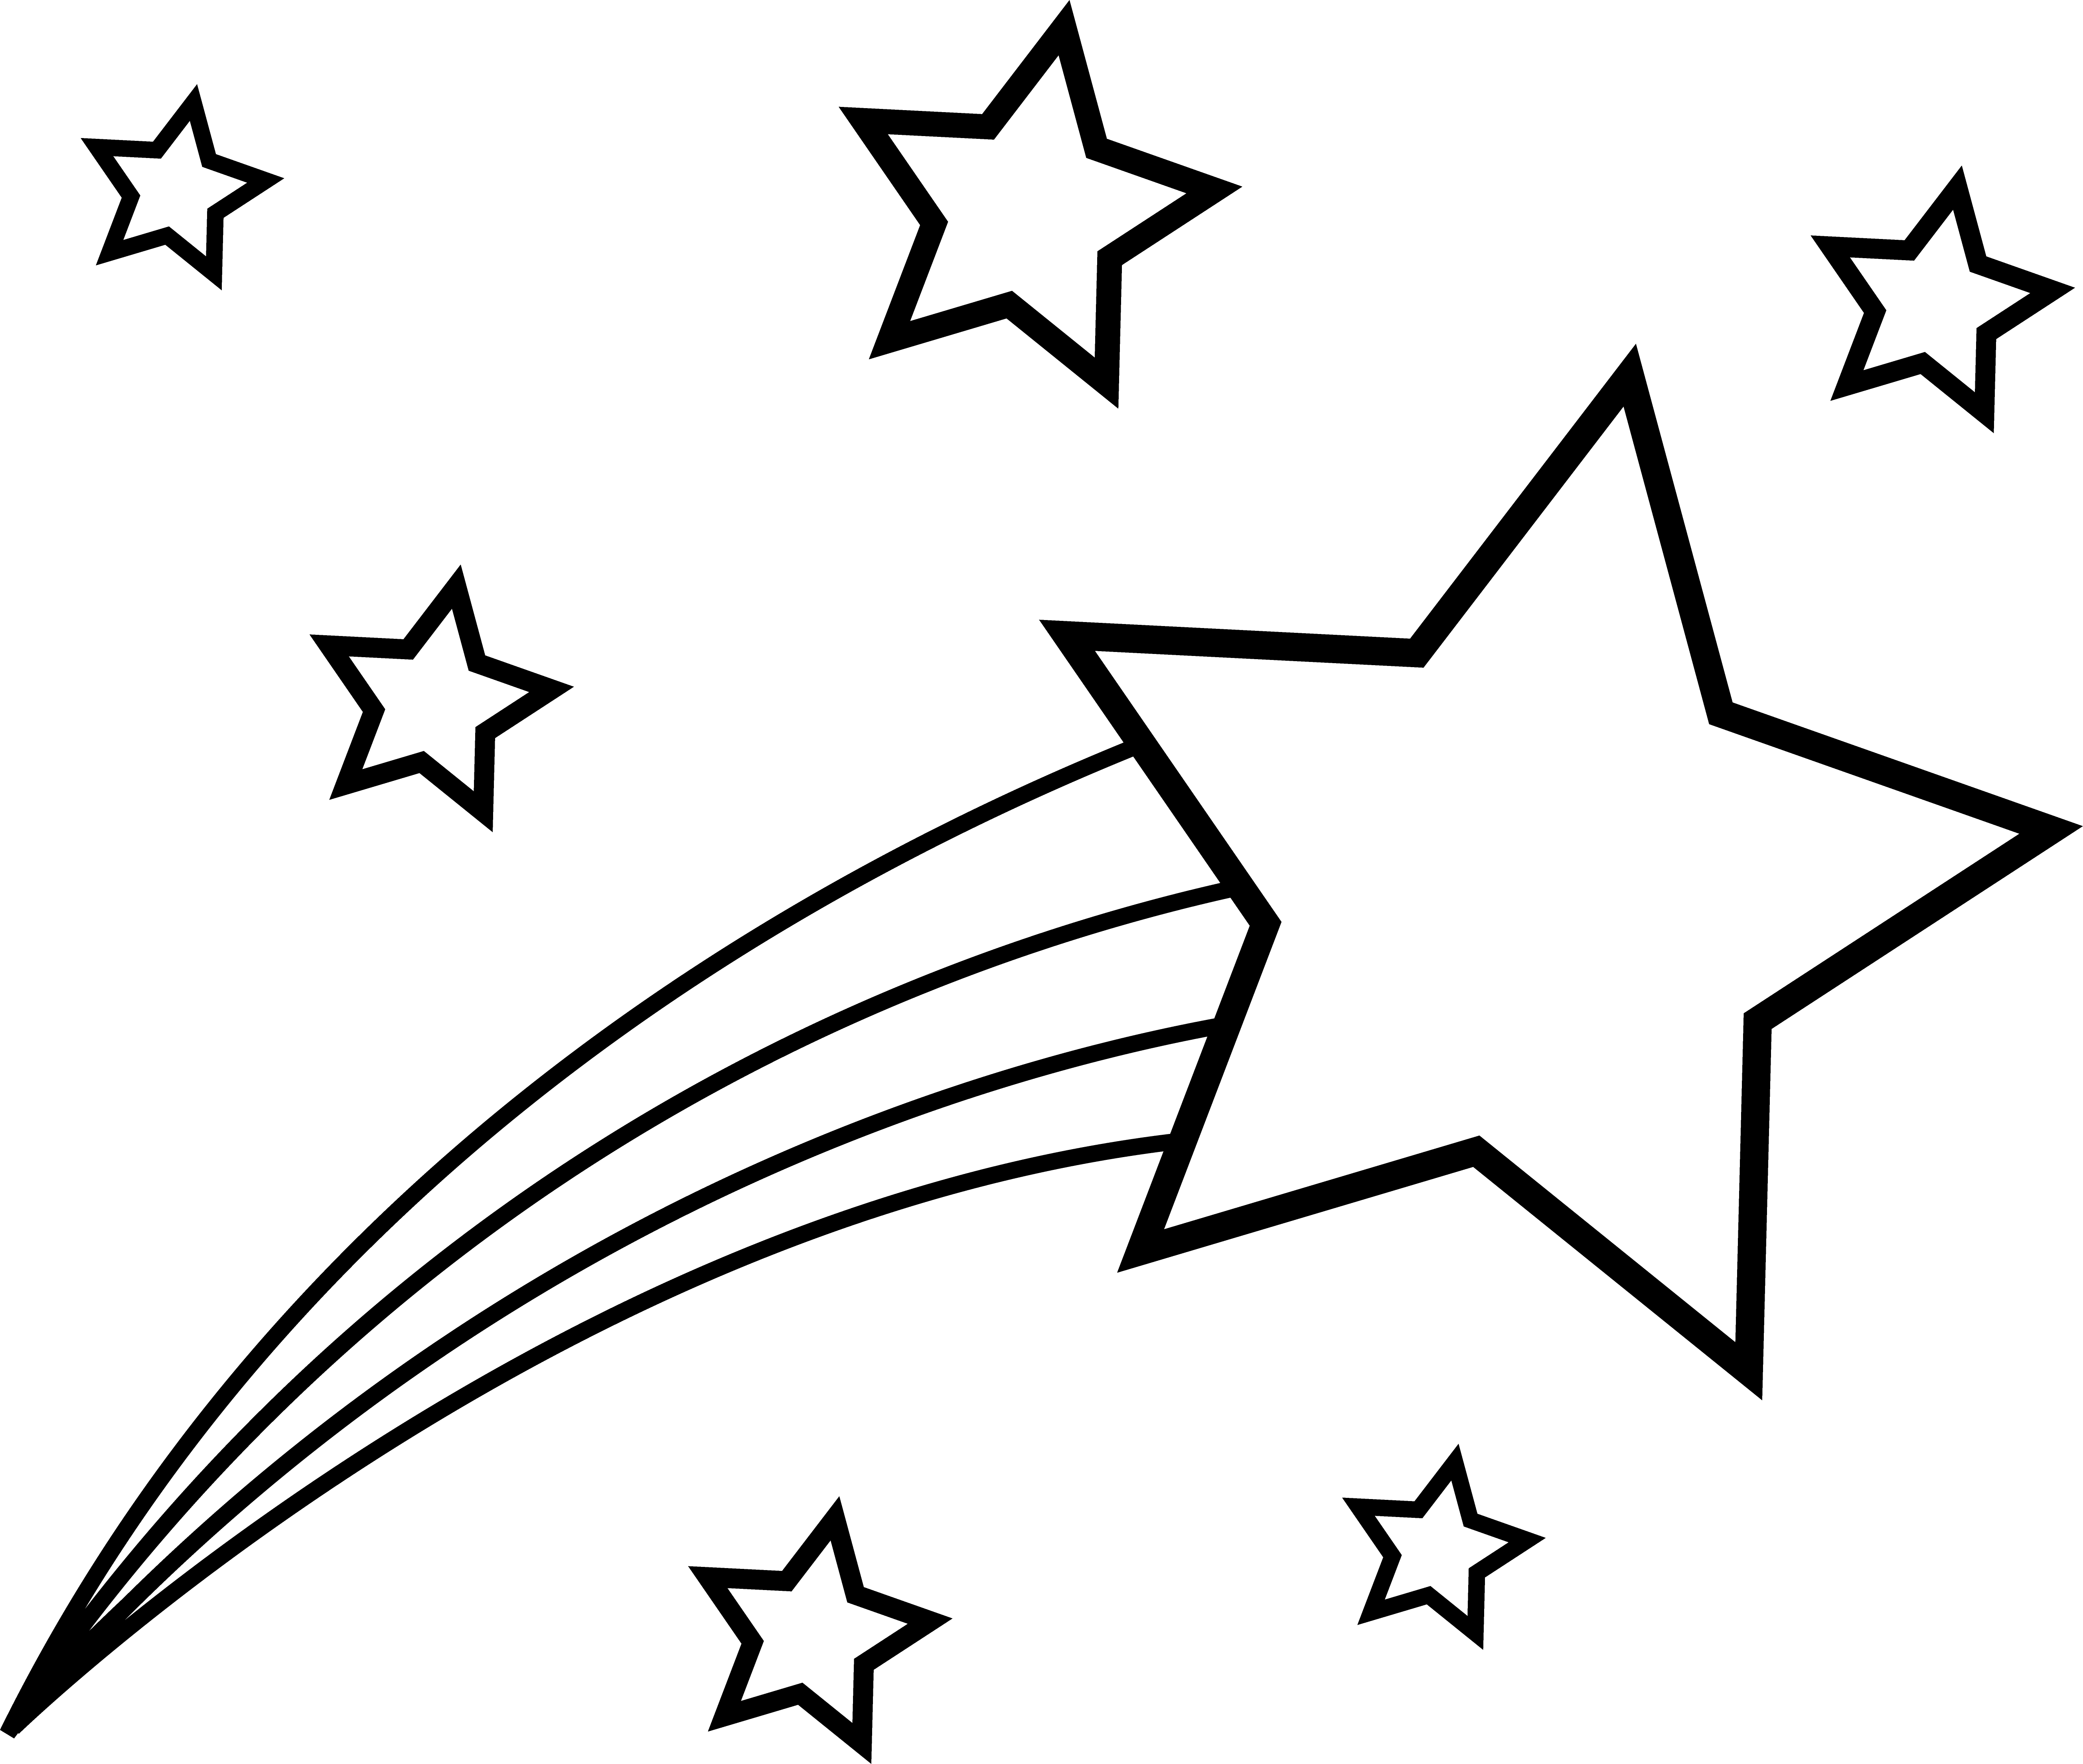 Free Vector Shooting Star - ClipArt Best